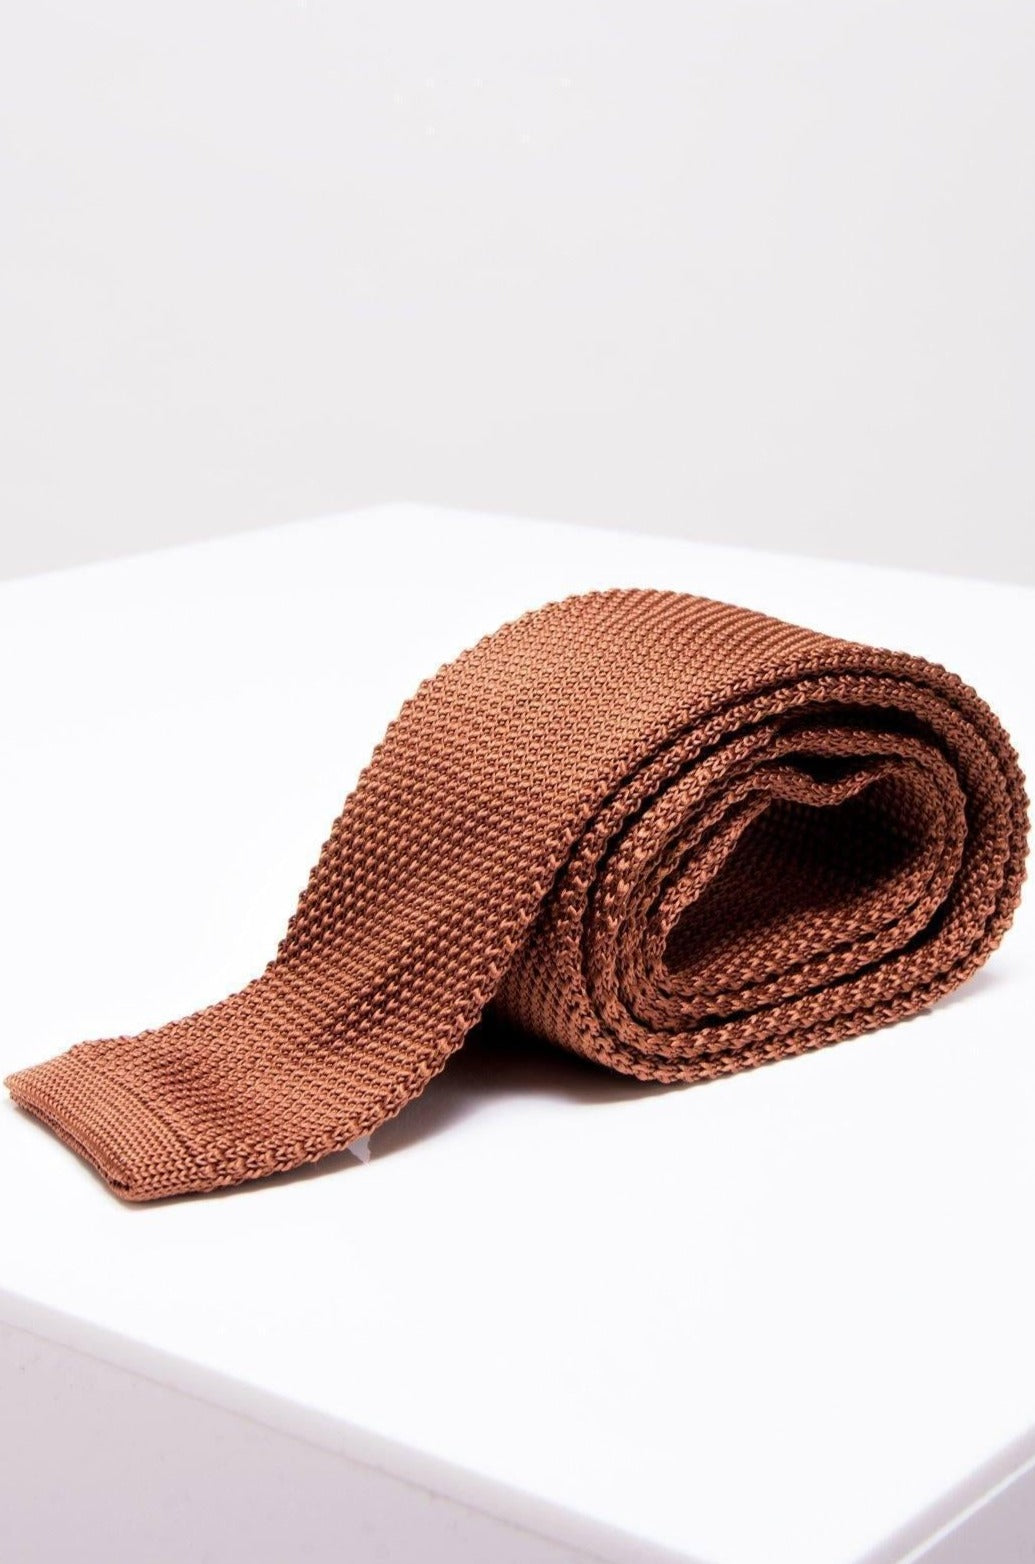 Knitted Mens Rust Tie